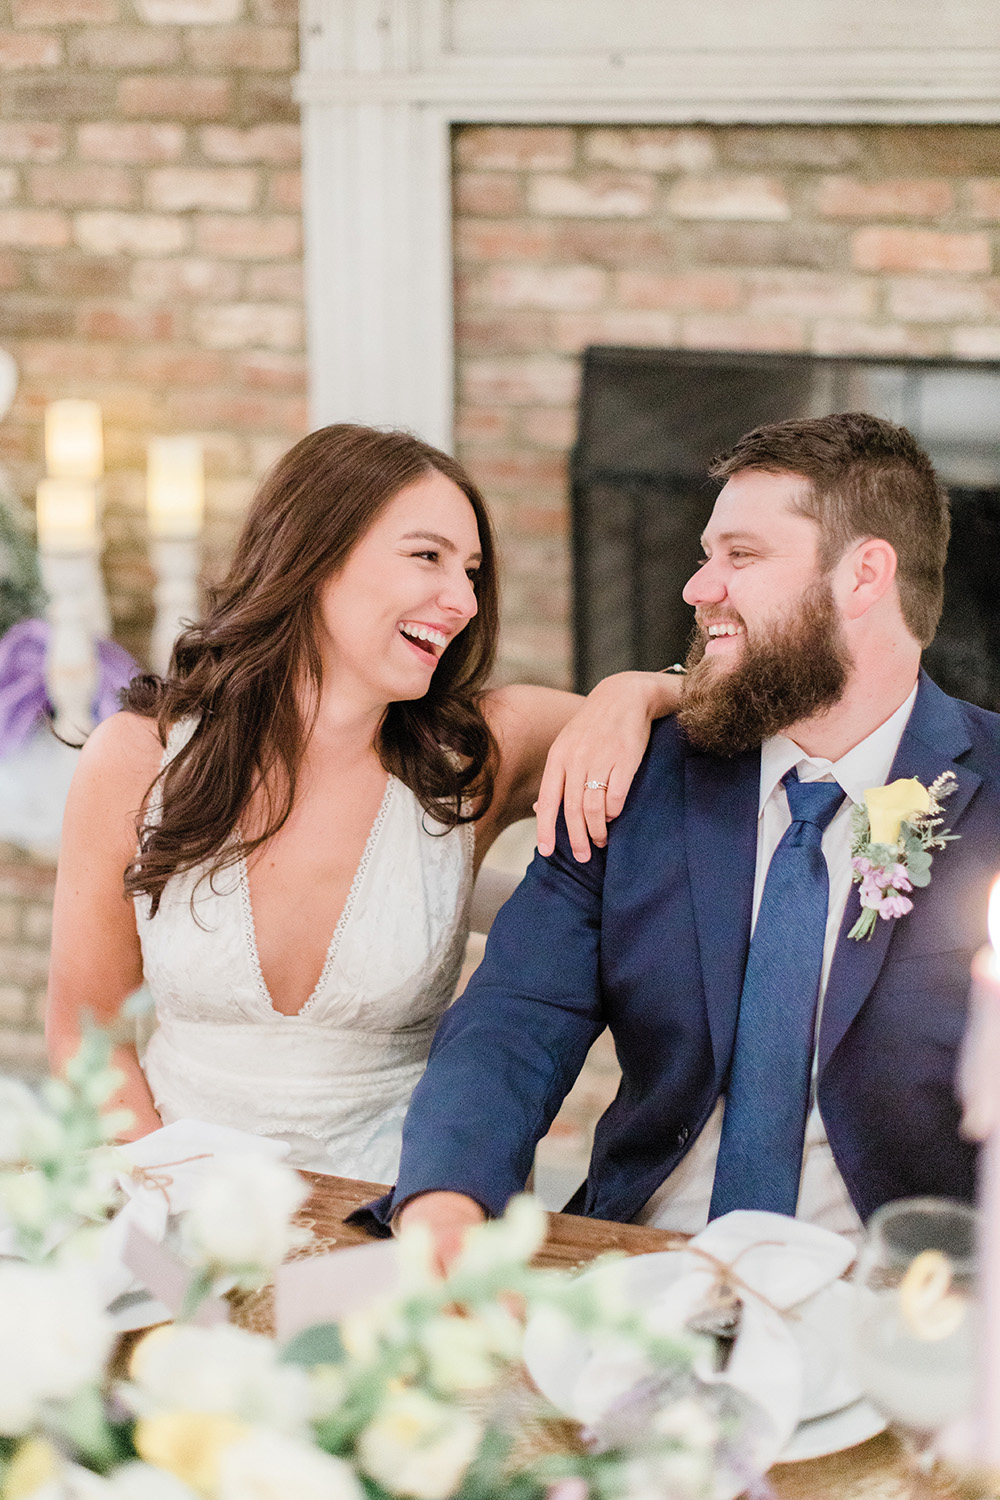 laughing couple at wedding table